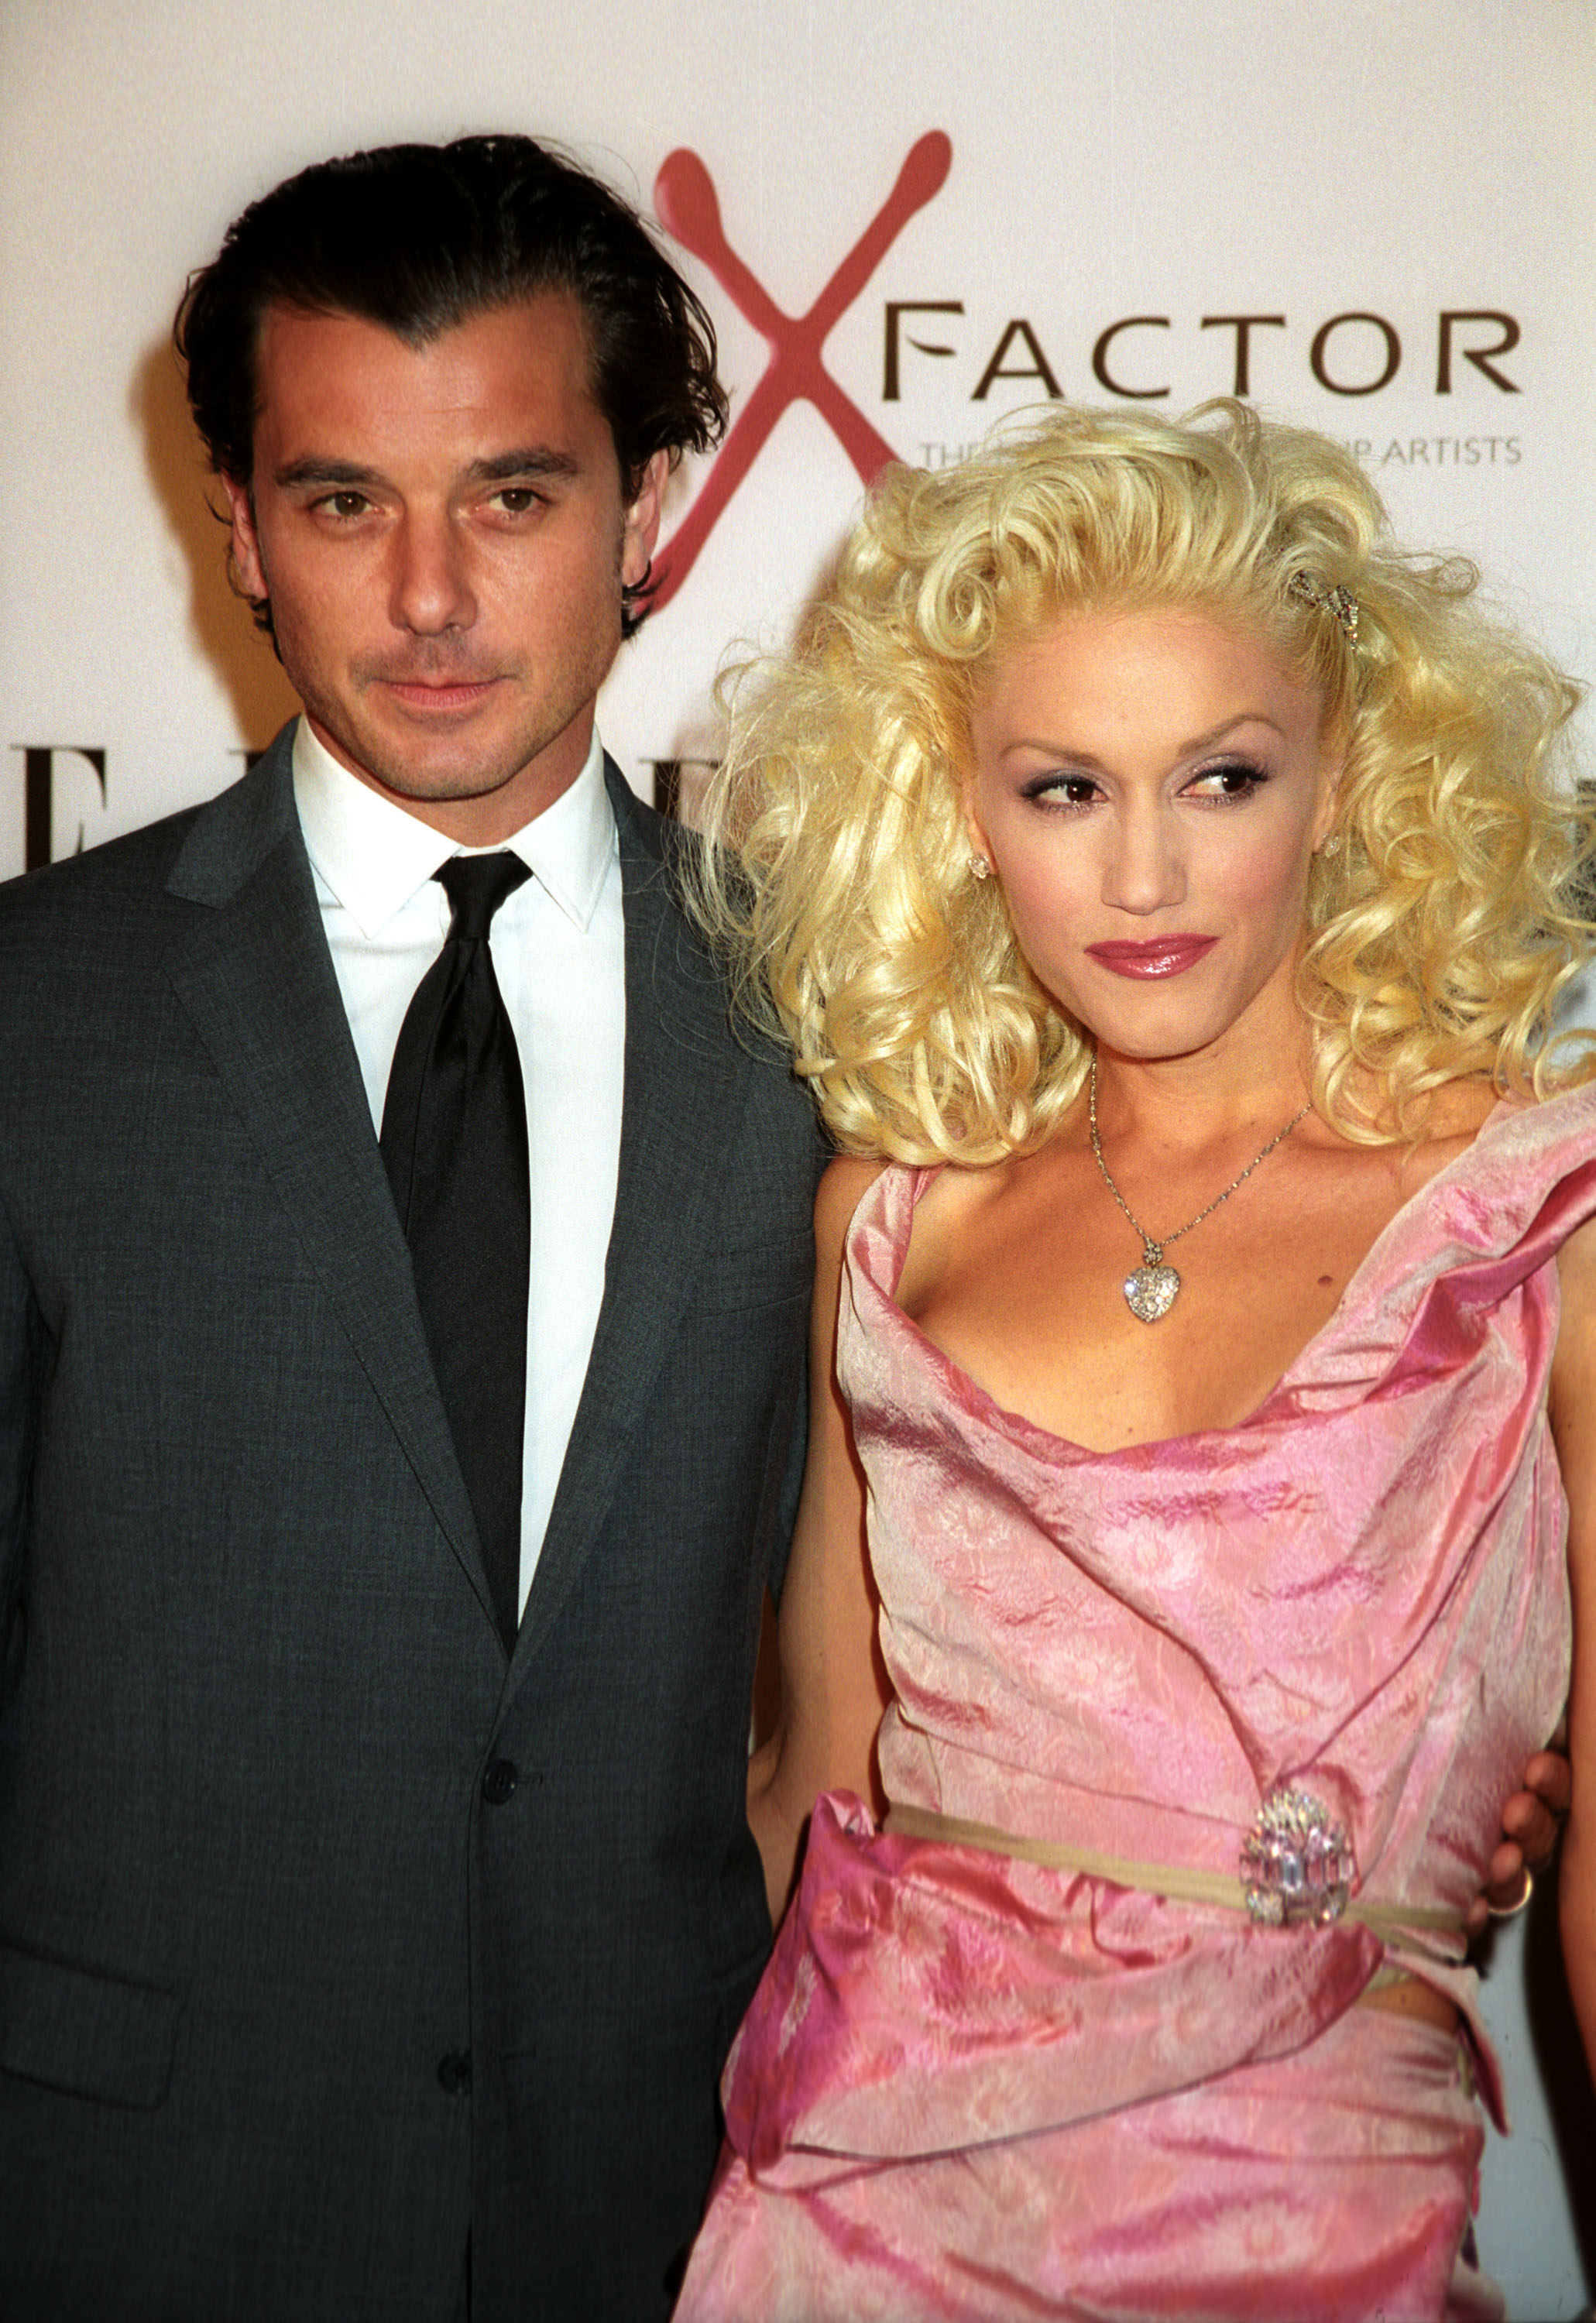 Gwen Stefani and Gavin Rossdale attending the premiere of "The Aviator" at Grauman's Chinese Theater in Hollywood, California, on December 1, 2004 | Source: Getty Images